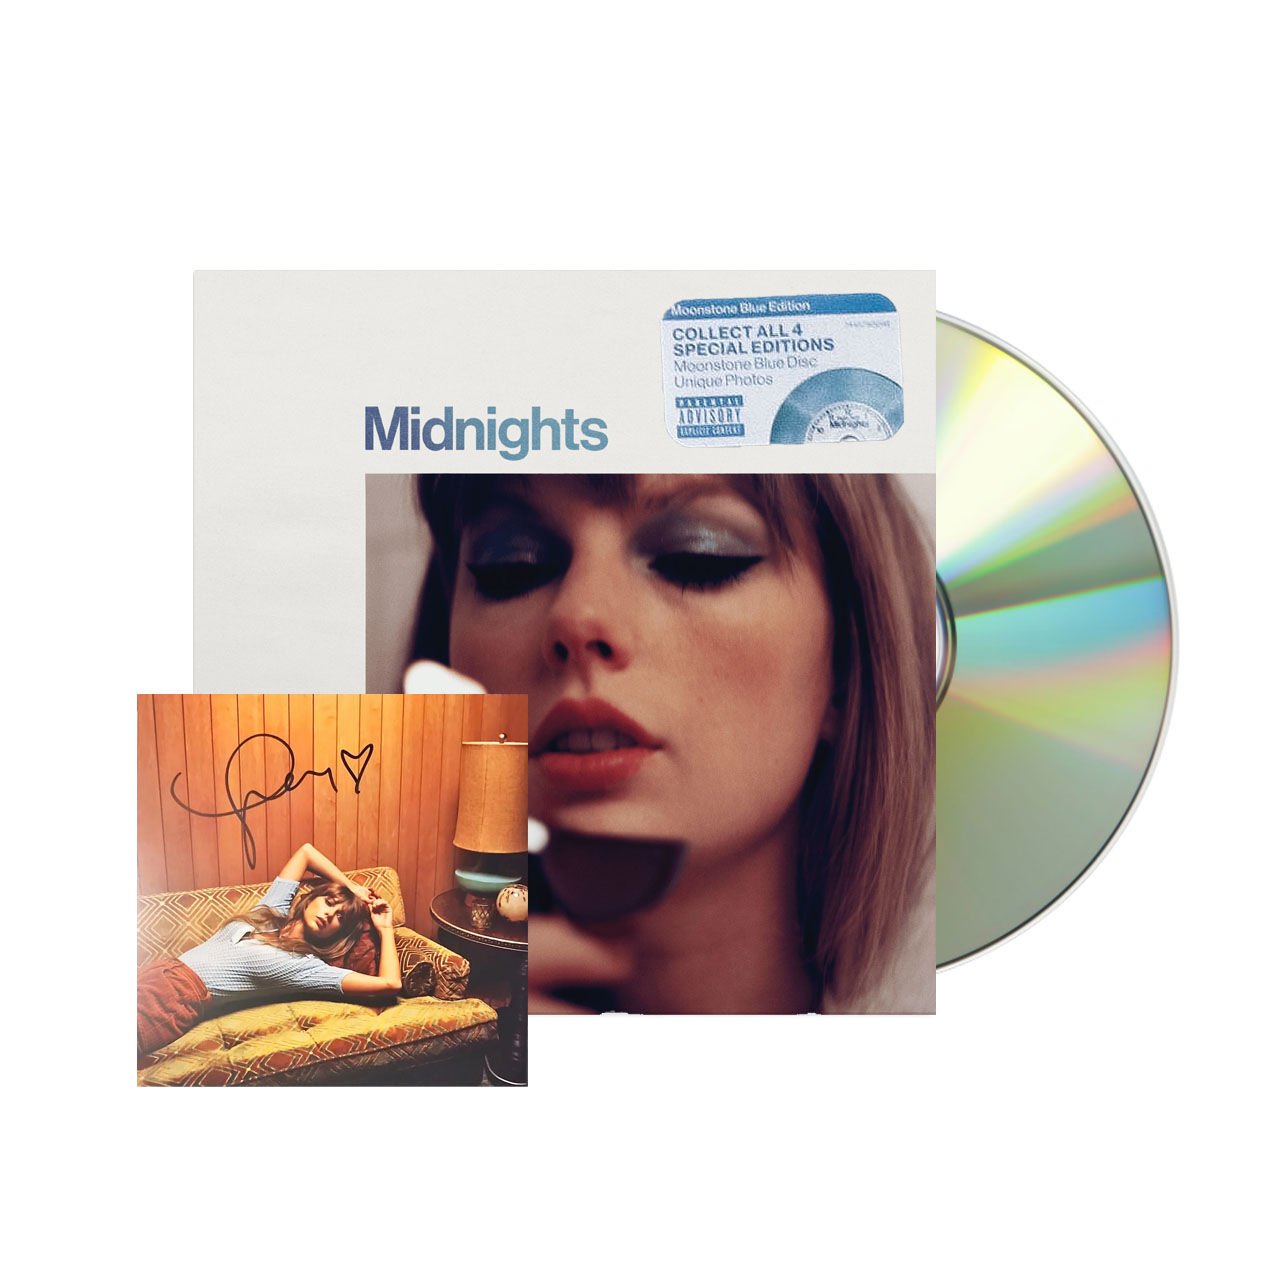 Taylor Swift - Midnights: Moonstone Blue Edition CD (Clean) 